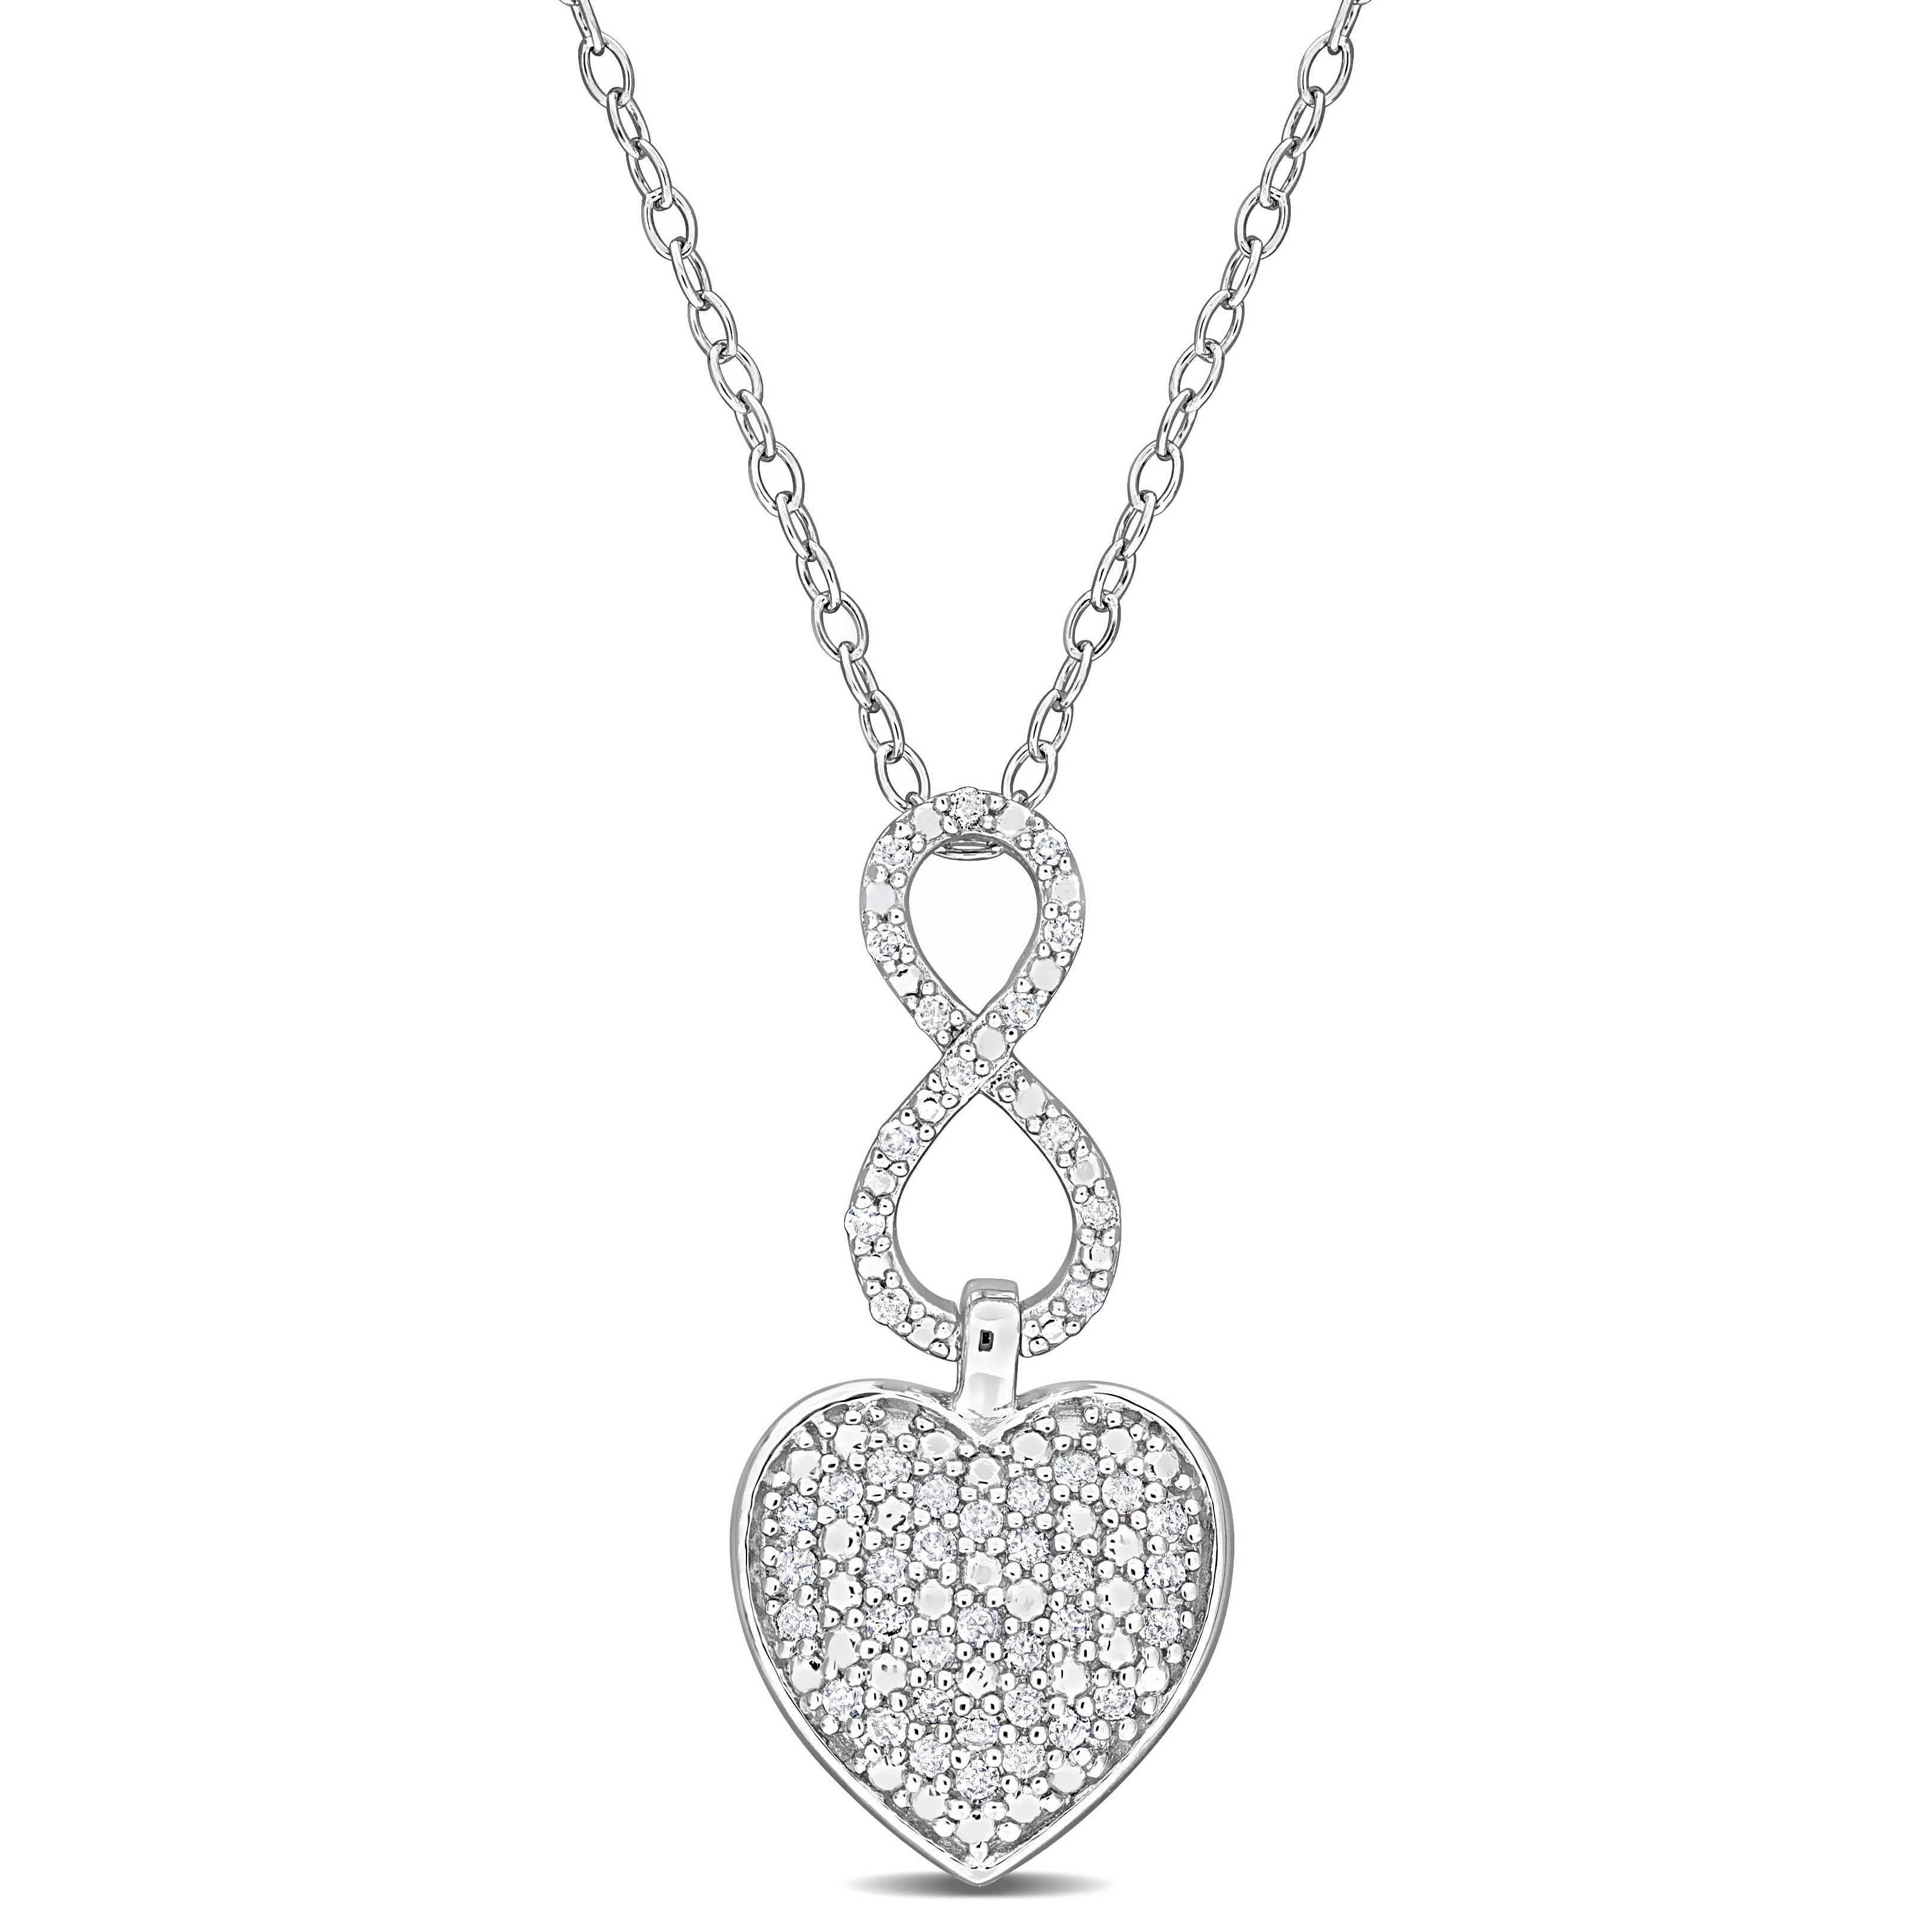 1/4 CT TDW Diamond Infinity Heart Pendant w Round Cable Chain in Sterling Silver - 18 in.